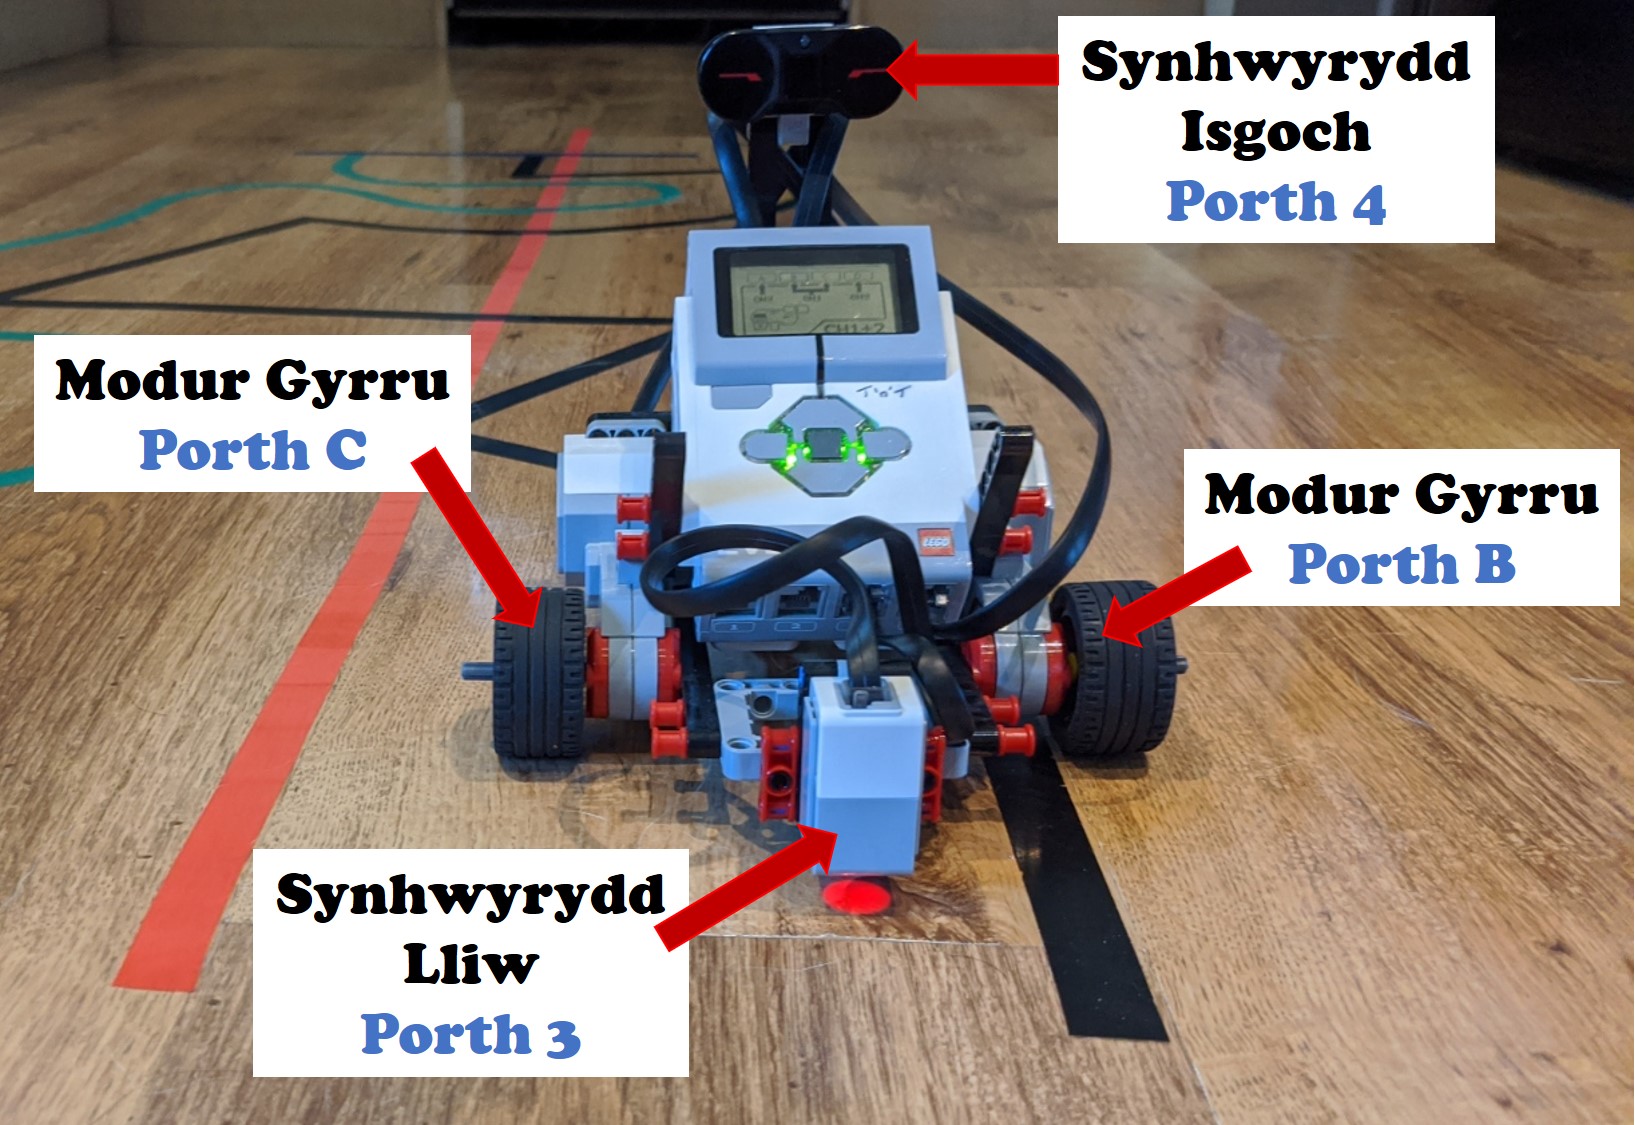 The specifications of the Johnny build. It's right wheel is powered by a motor in port C whilst the right is also motorised but through port B. A colour sensor mounted on the front pointing at the floor is connected to Port 3. An InfraRed sensor is facing forward mounted at the back and top, connected to Port 4